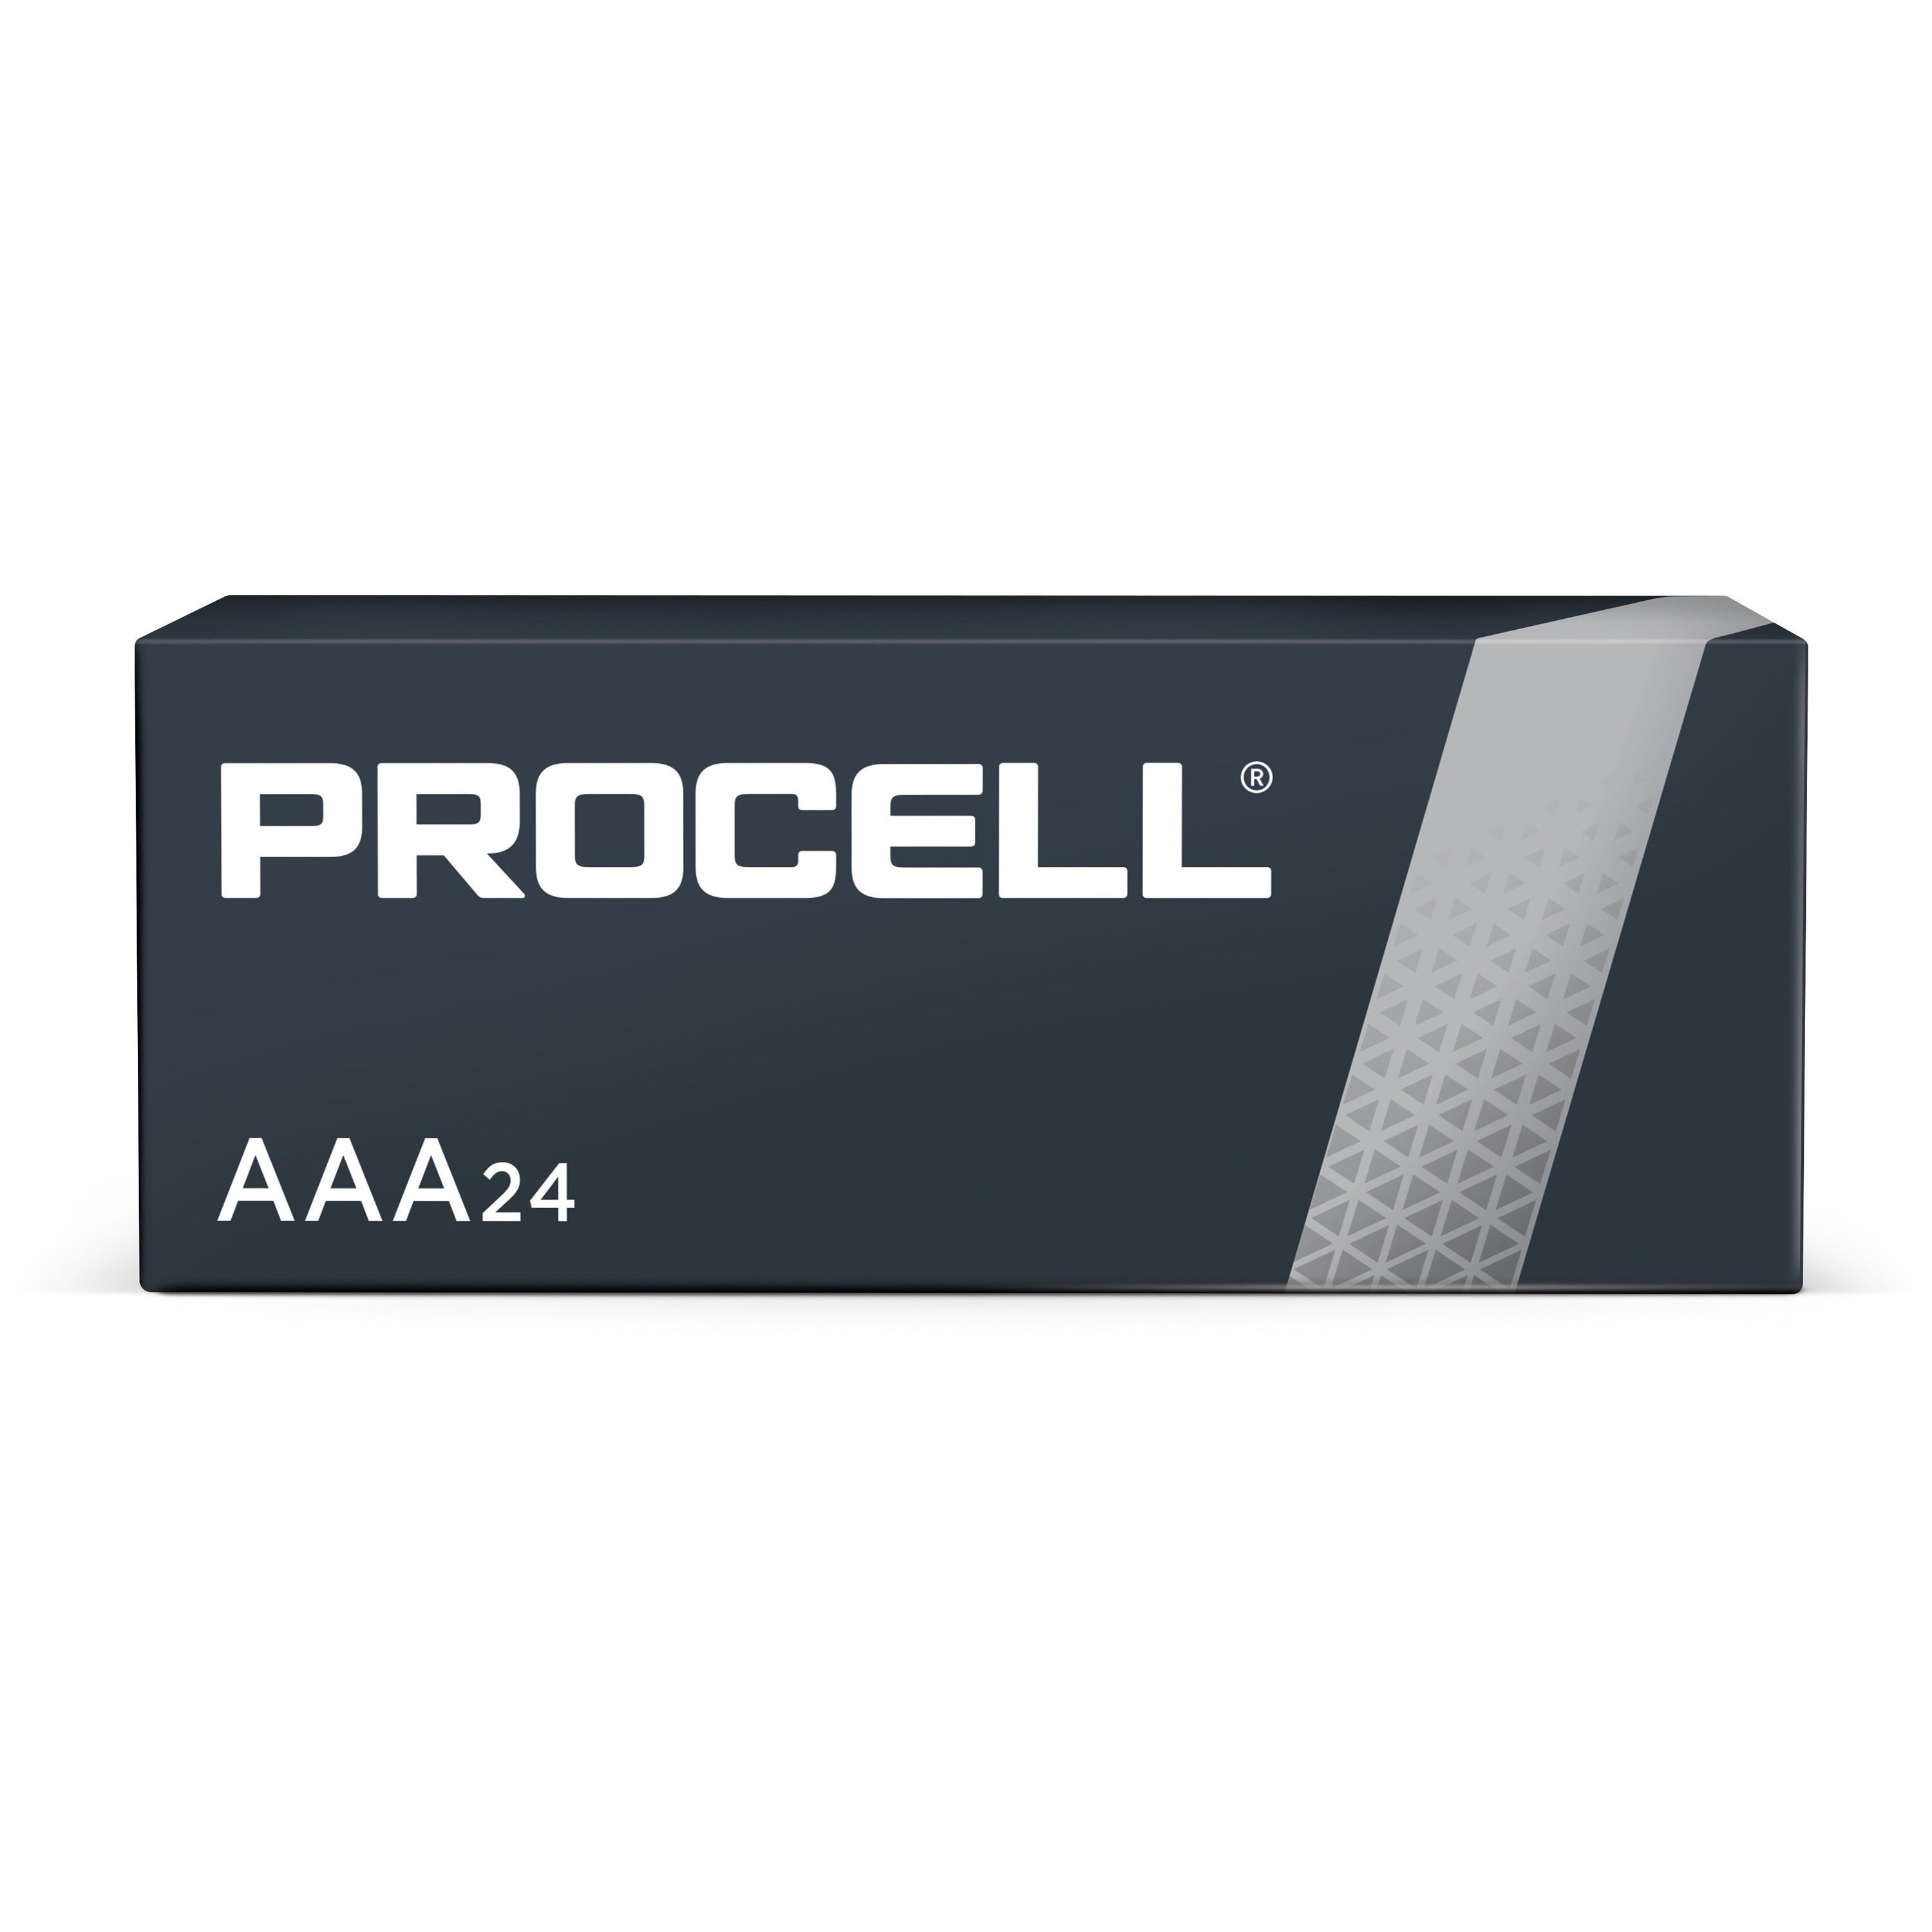 duracell-procell-constant-power-alkaline-aaa-battery-boxes-of-24-for-calculator-multipurpose-remote-control-test-equipment-flashlight-clock-radio-portable-electronics-mouse-keyboard-aaa-15-v-dc-6-carton_durpc2400bkdct - 1